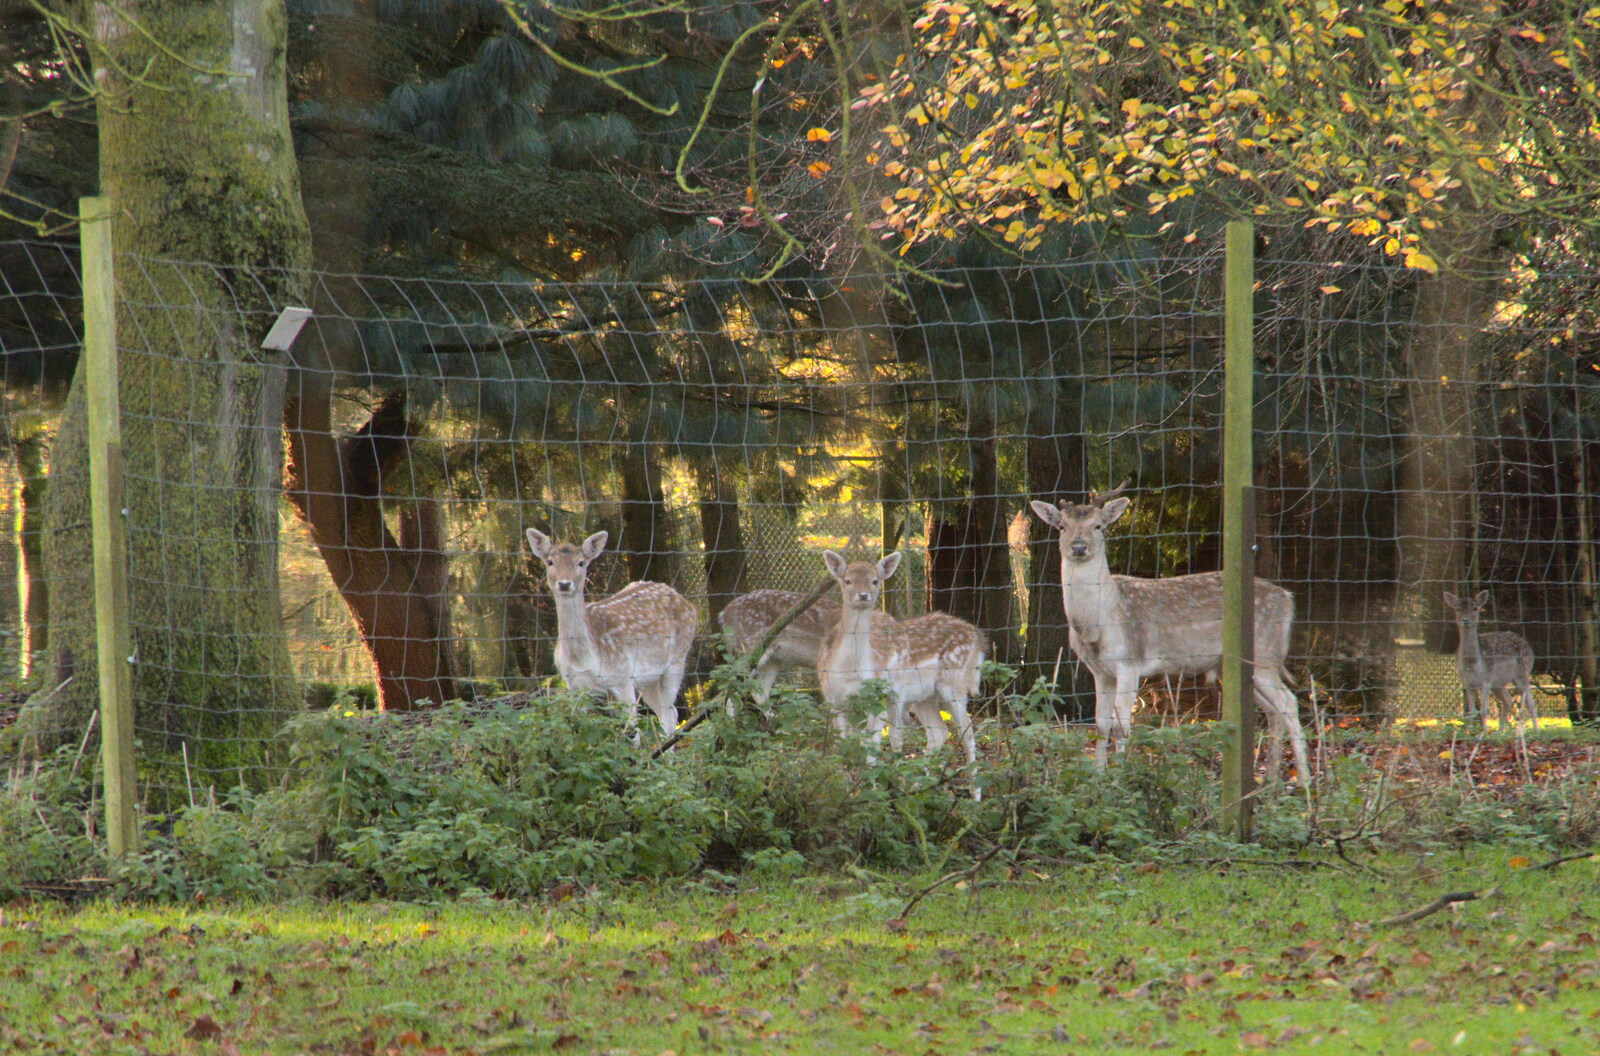 Drone Flying and the Old Chapel, Thrandeston, Suffolk - 15th November 2020: Fallow deer have their ears up as they watch